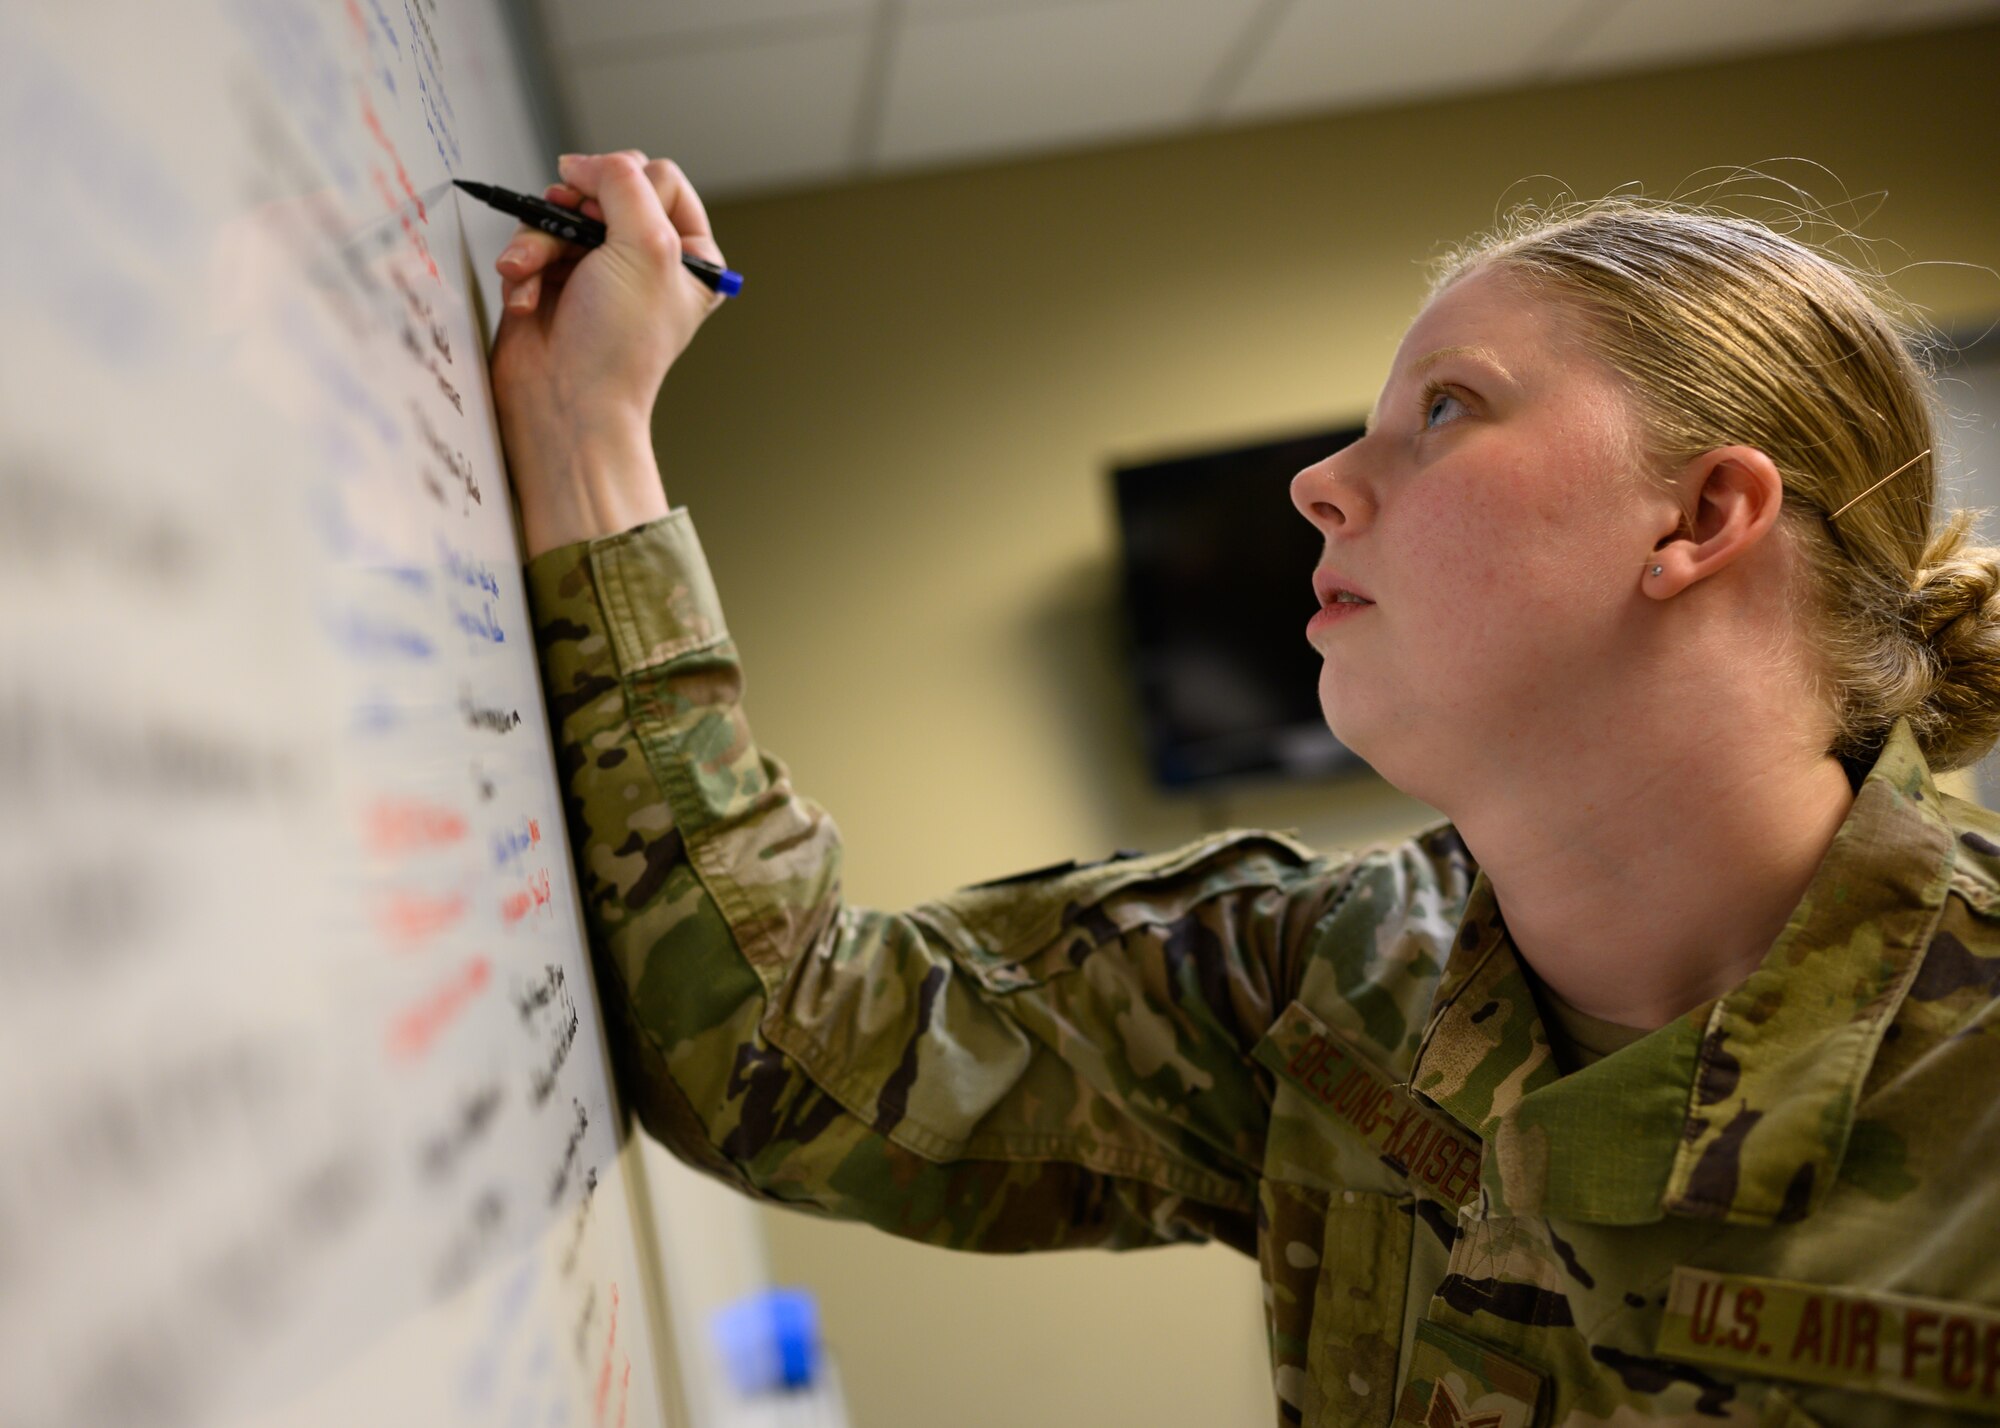 U.S. Air Force Staff Sgt. Gianna DeJong-Kaiser, an intelligence analyst for the 275th Cyberspace Operations Squadron, Maryland Air National Guard, lists out mission details on a whiteboard April 21, 2021, at the Gulfport Combat Readiness Training Center, Gulfport, Mississippi.